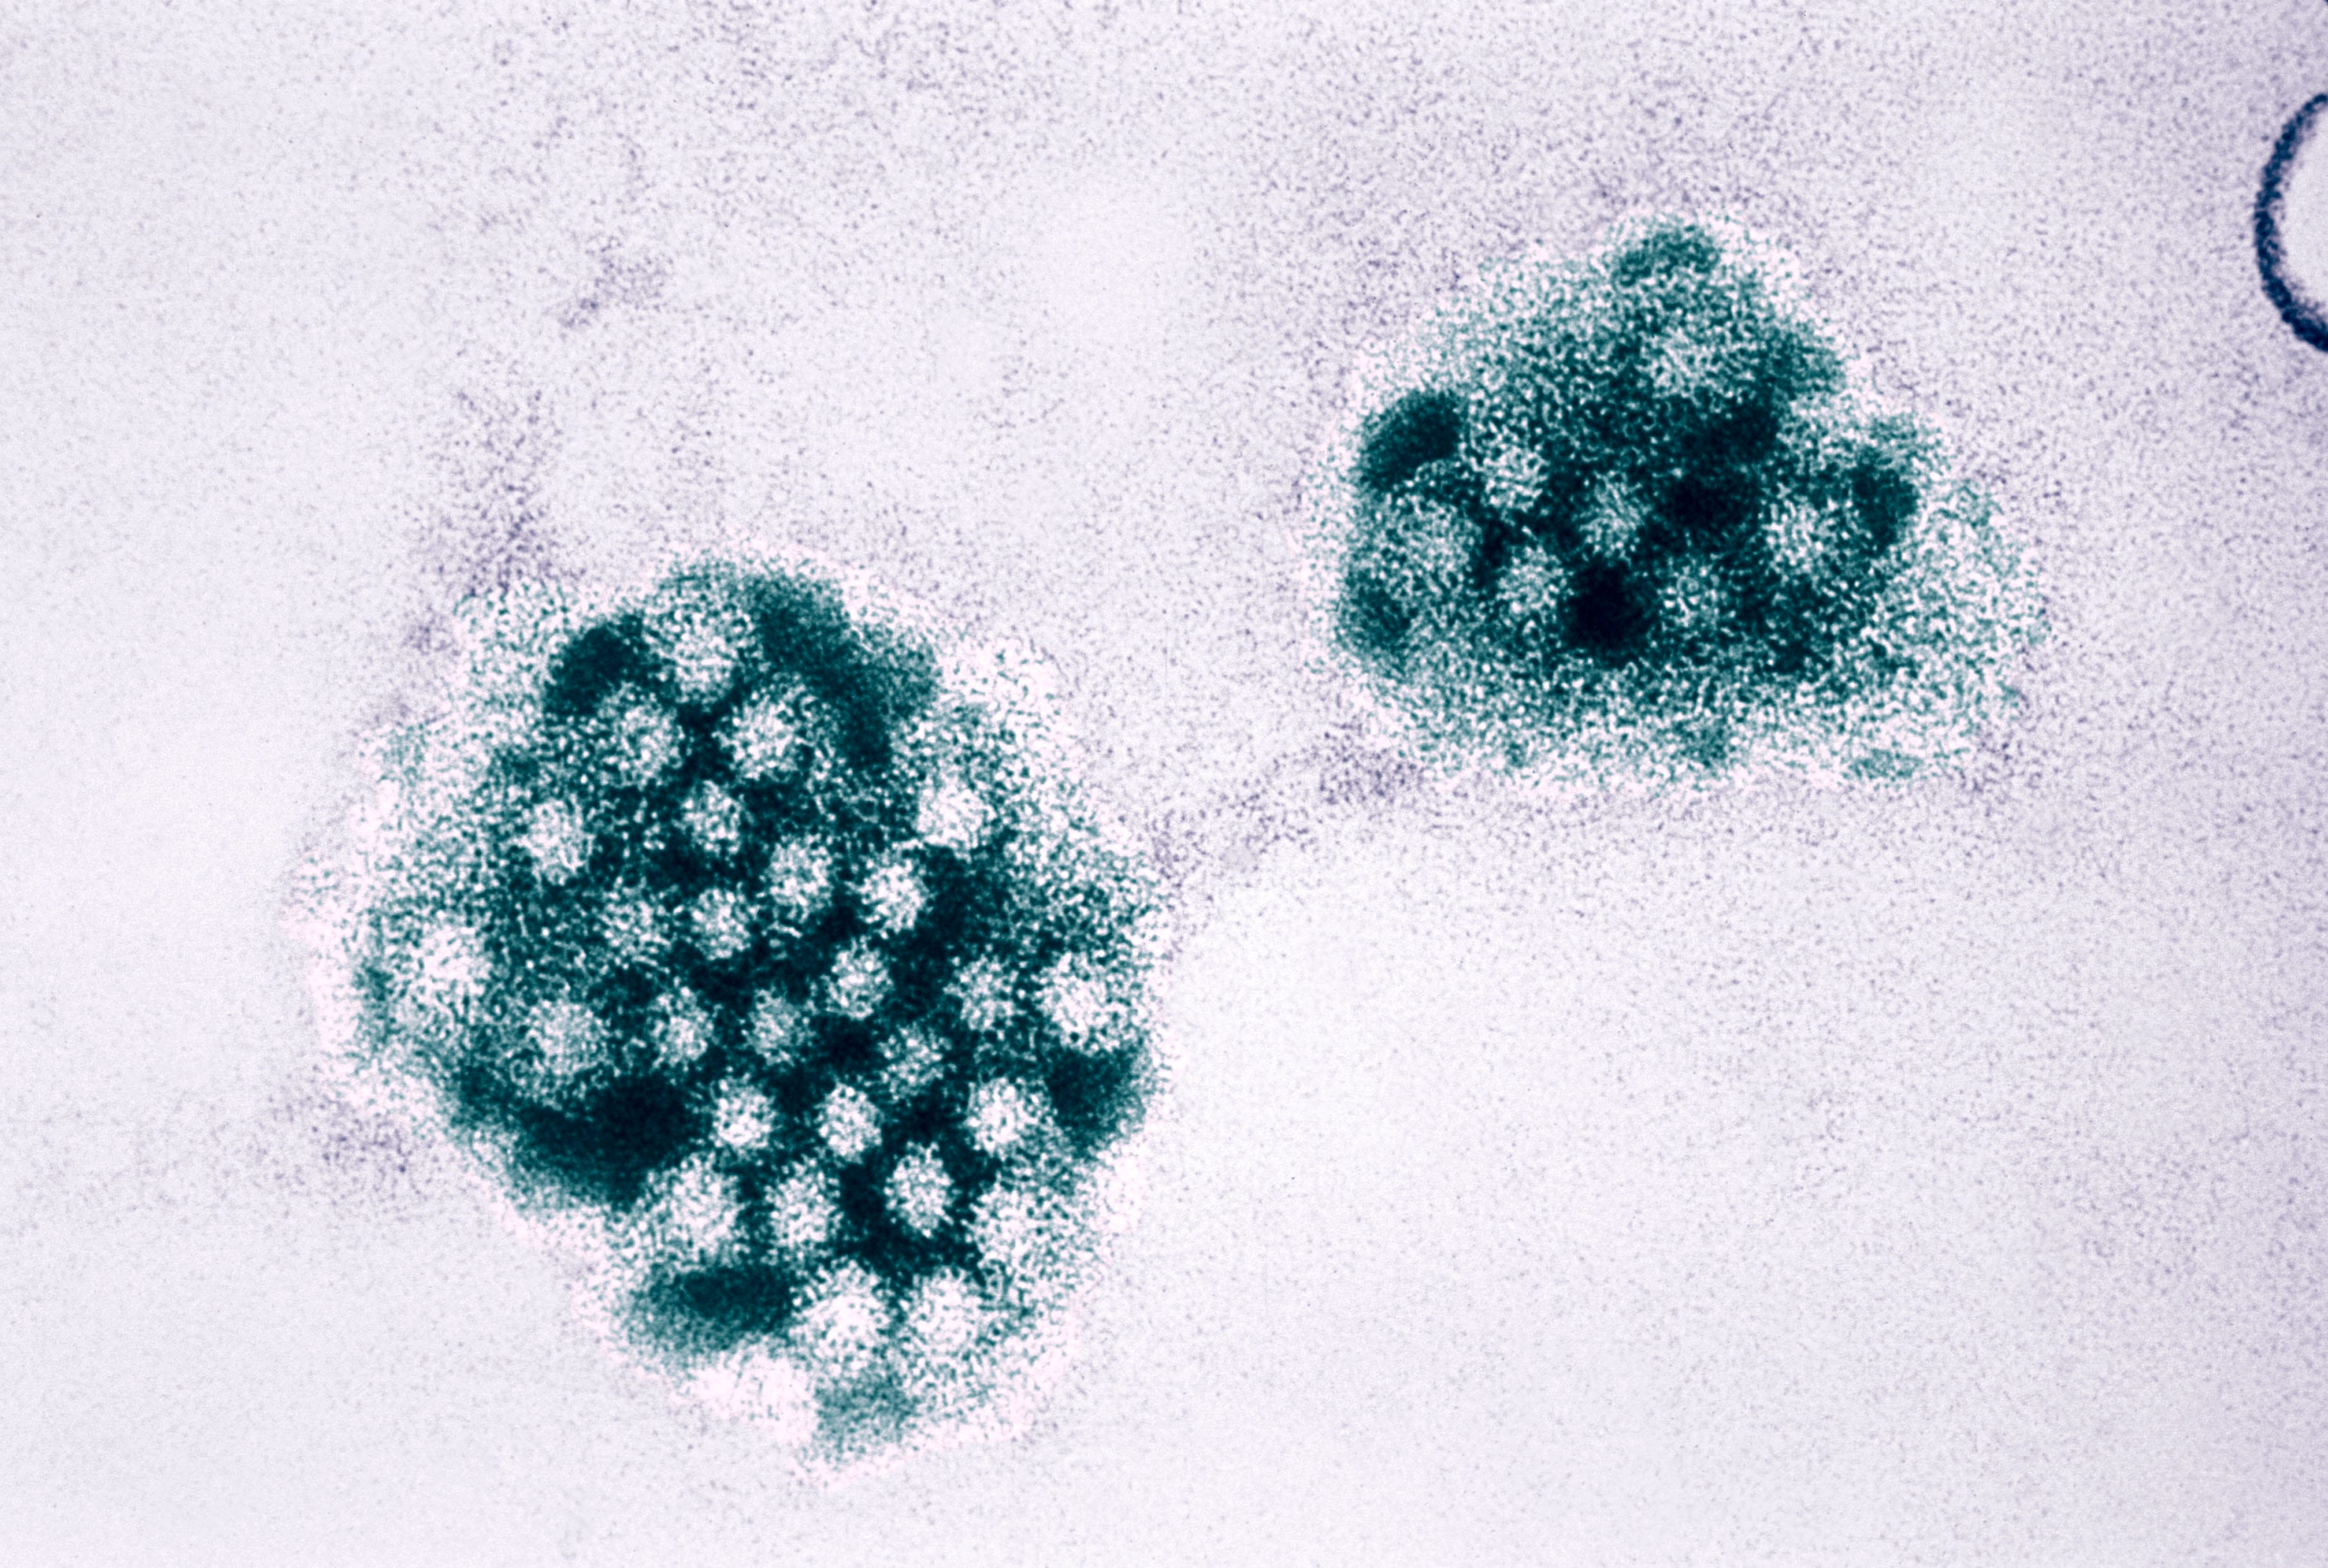 stomach virus spreading in northeast at highest rate in us: cdc